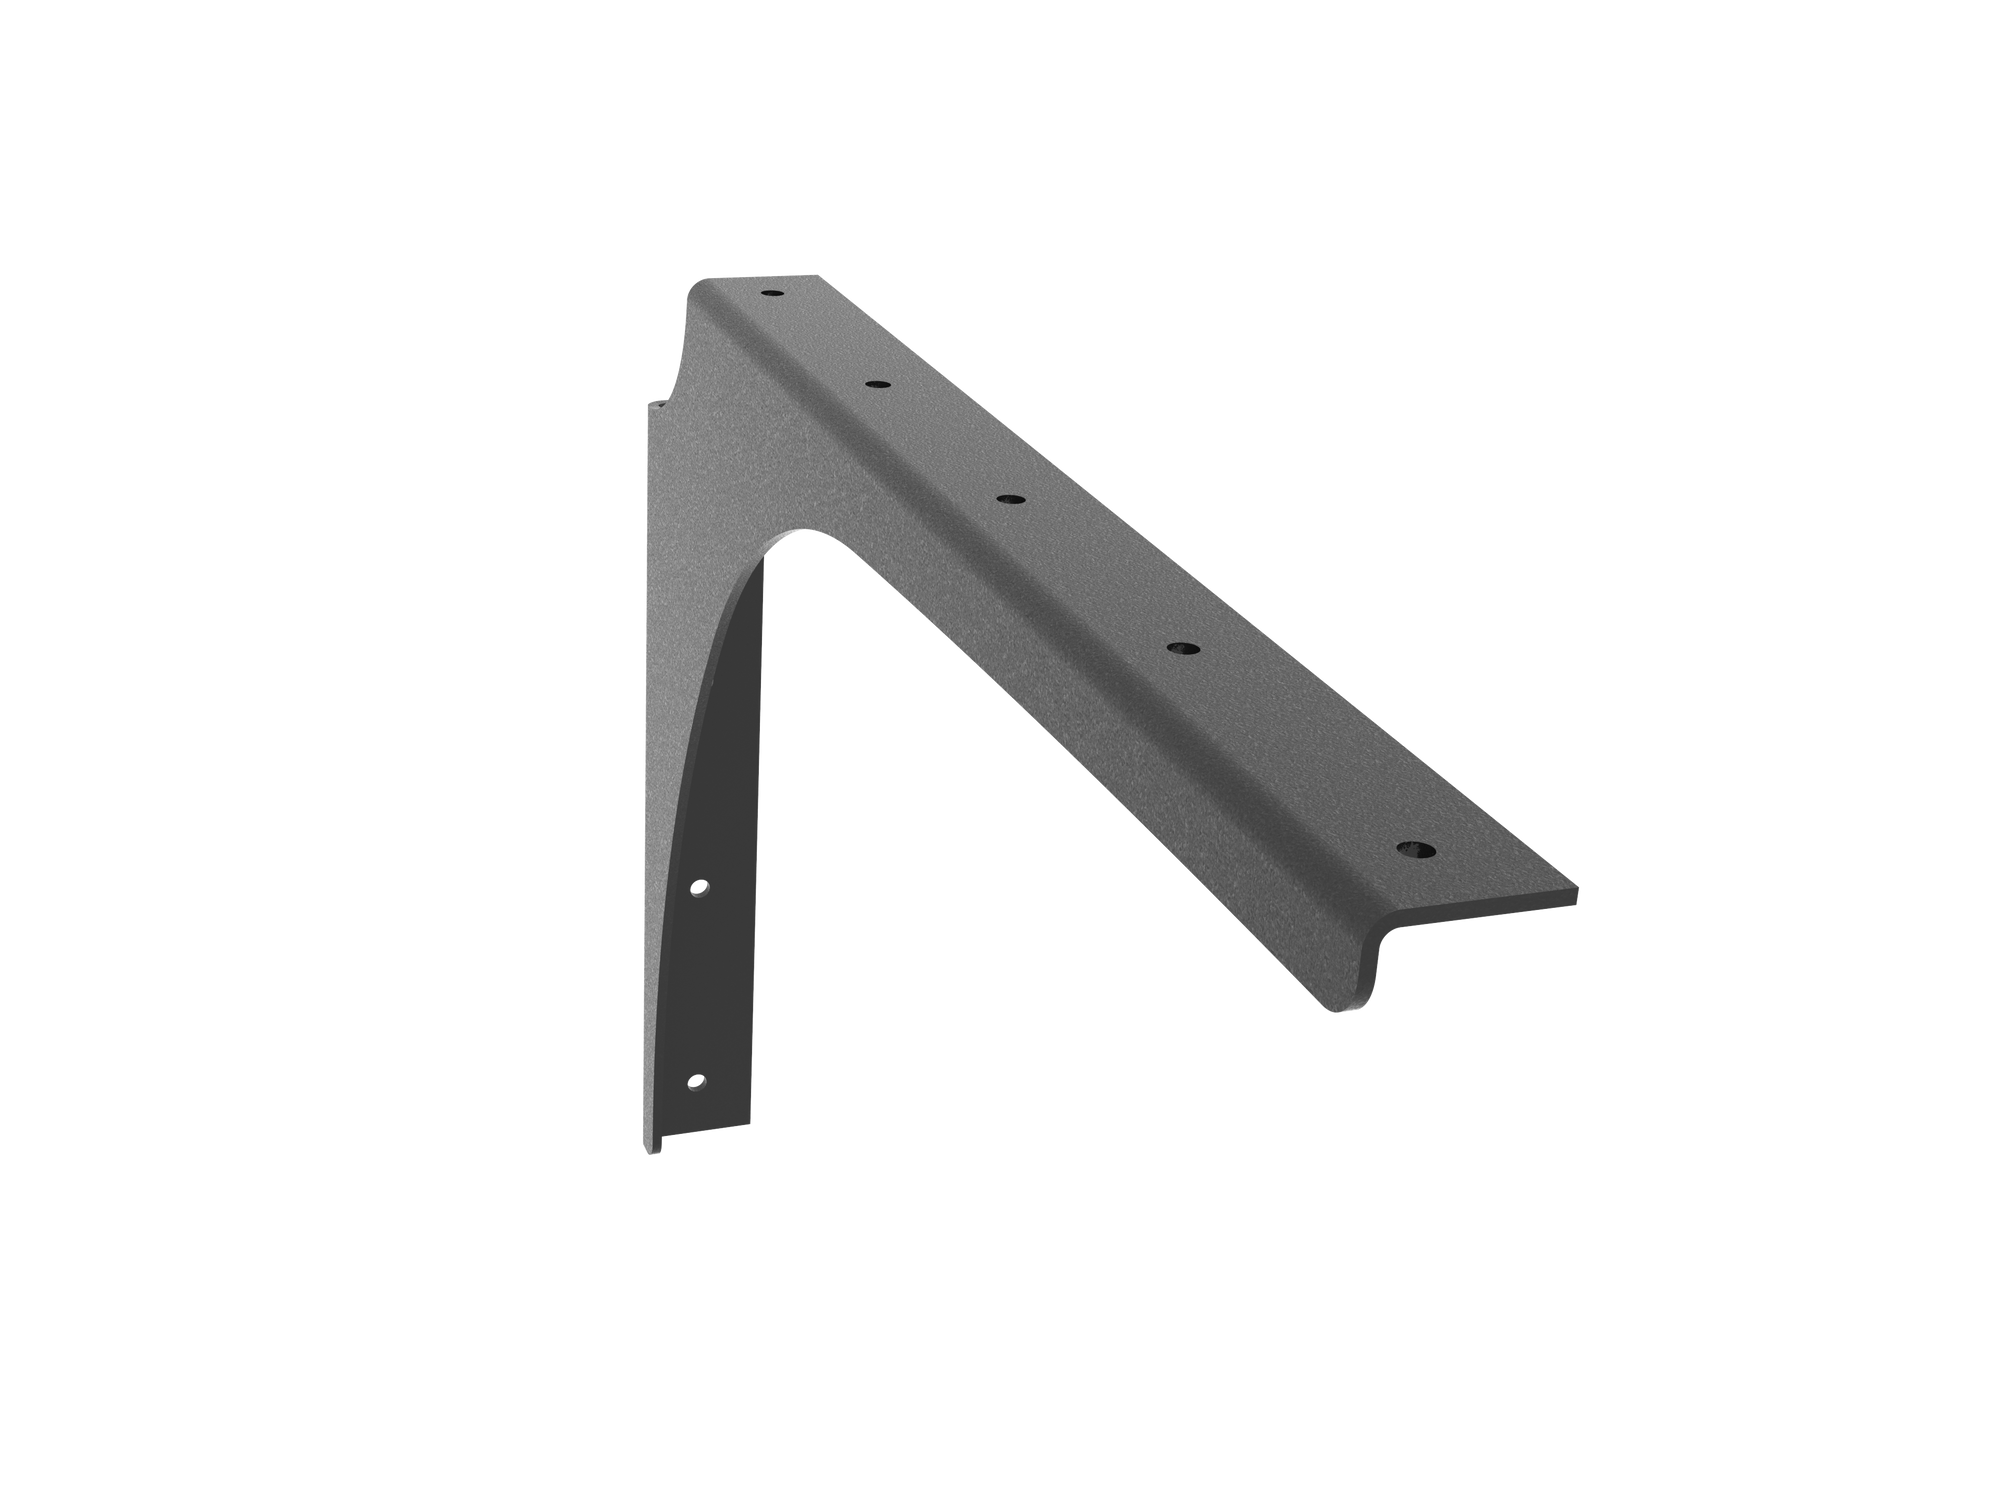 Universal Commercial Support Bracket - 18" x 12" with Black Powder Coat Finish. Supports floating ADA-compliant vanities, desks, shelving, countertops, and more.